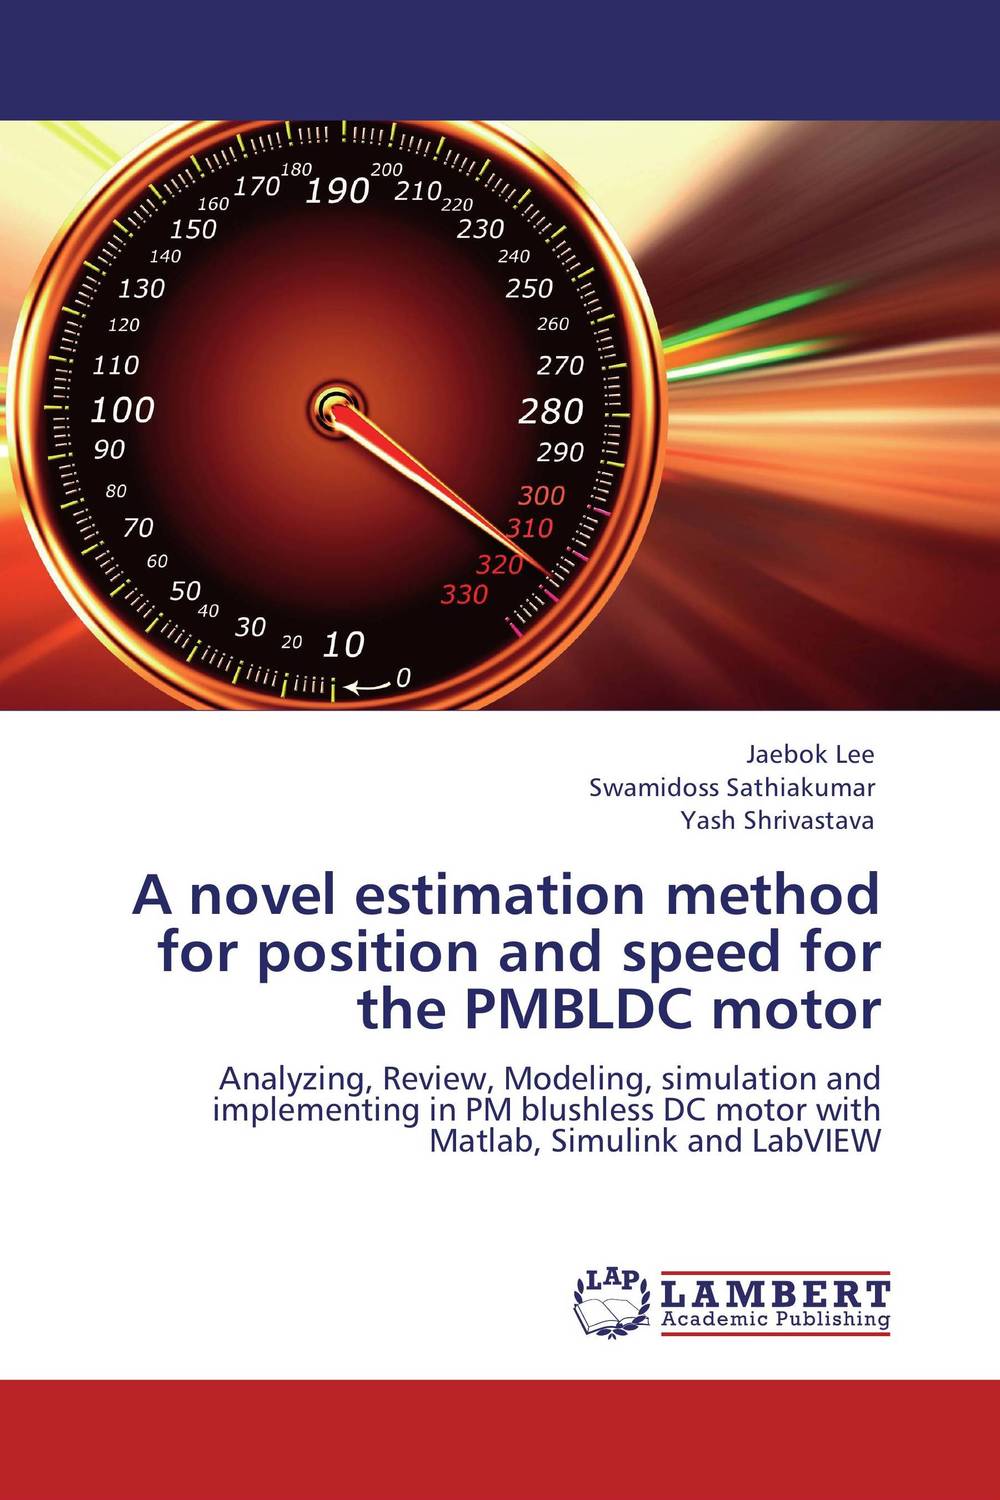 A novel estimation method for position and speed for the PMBLDC motor